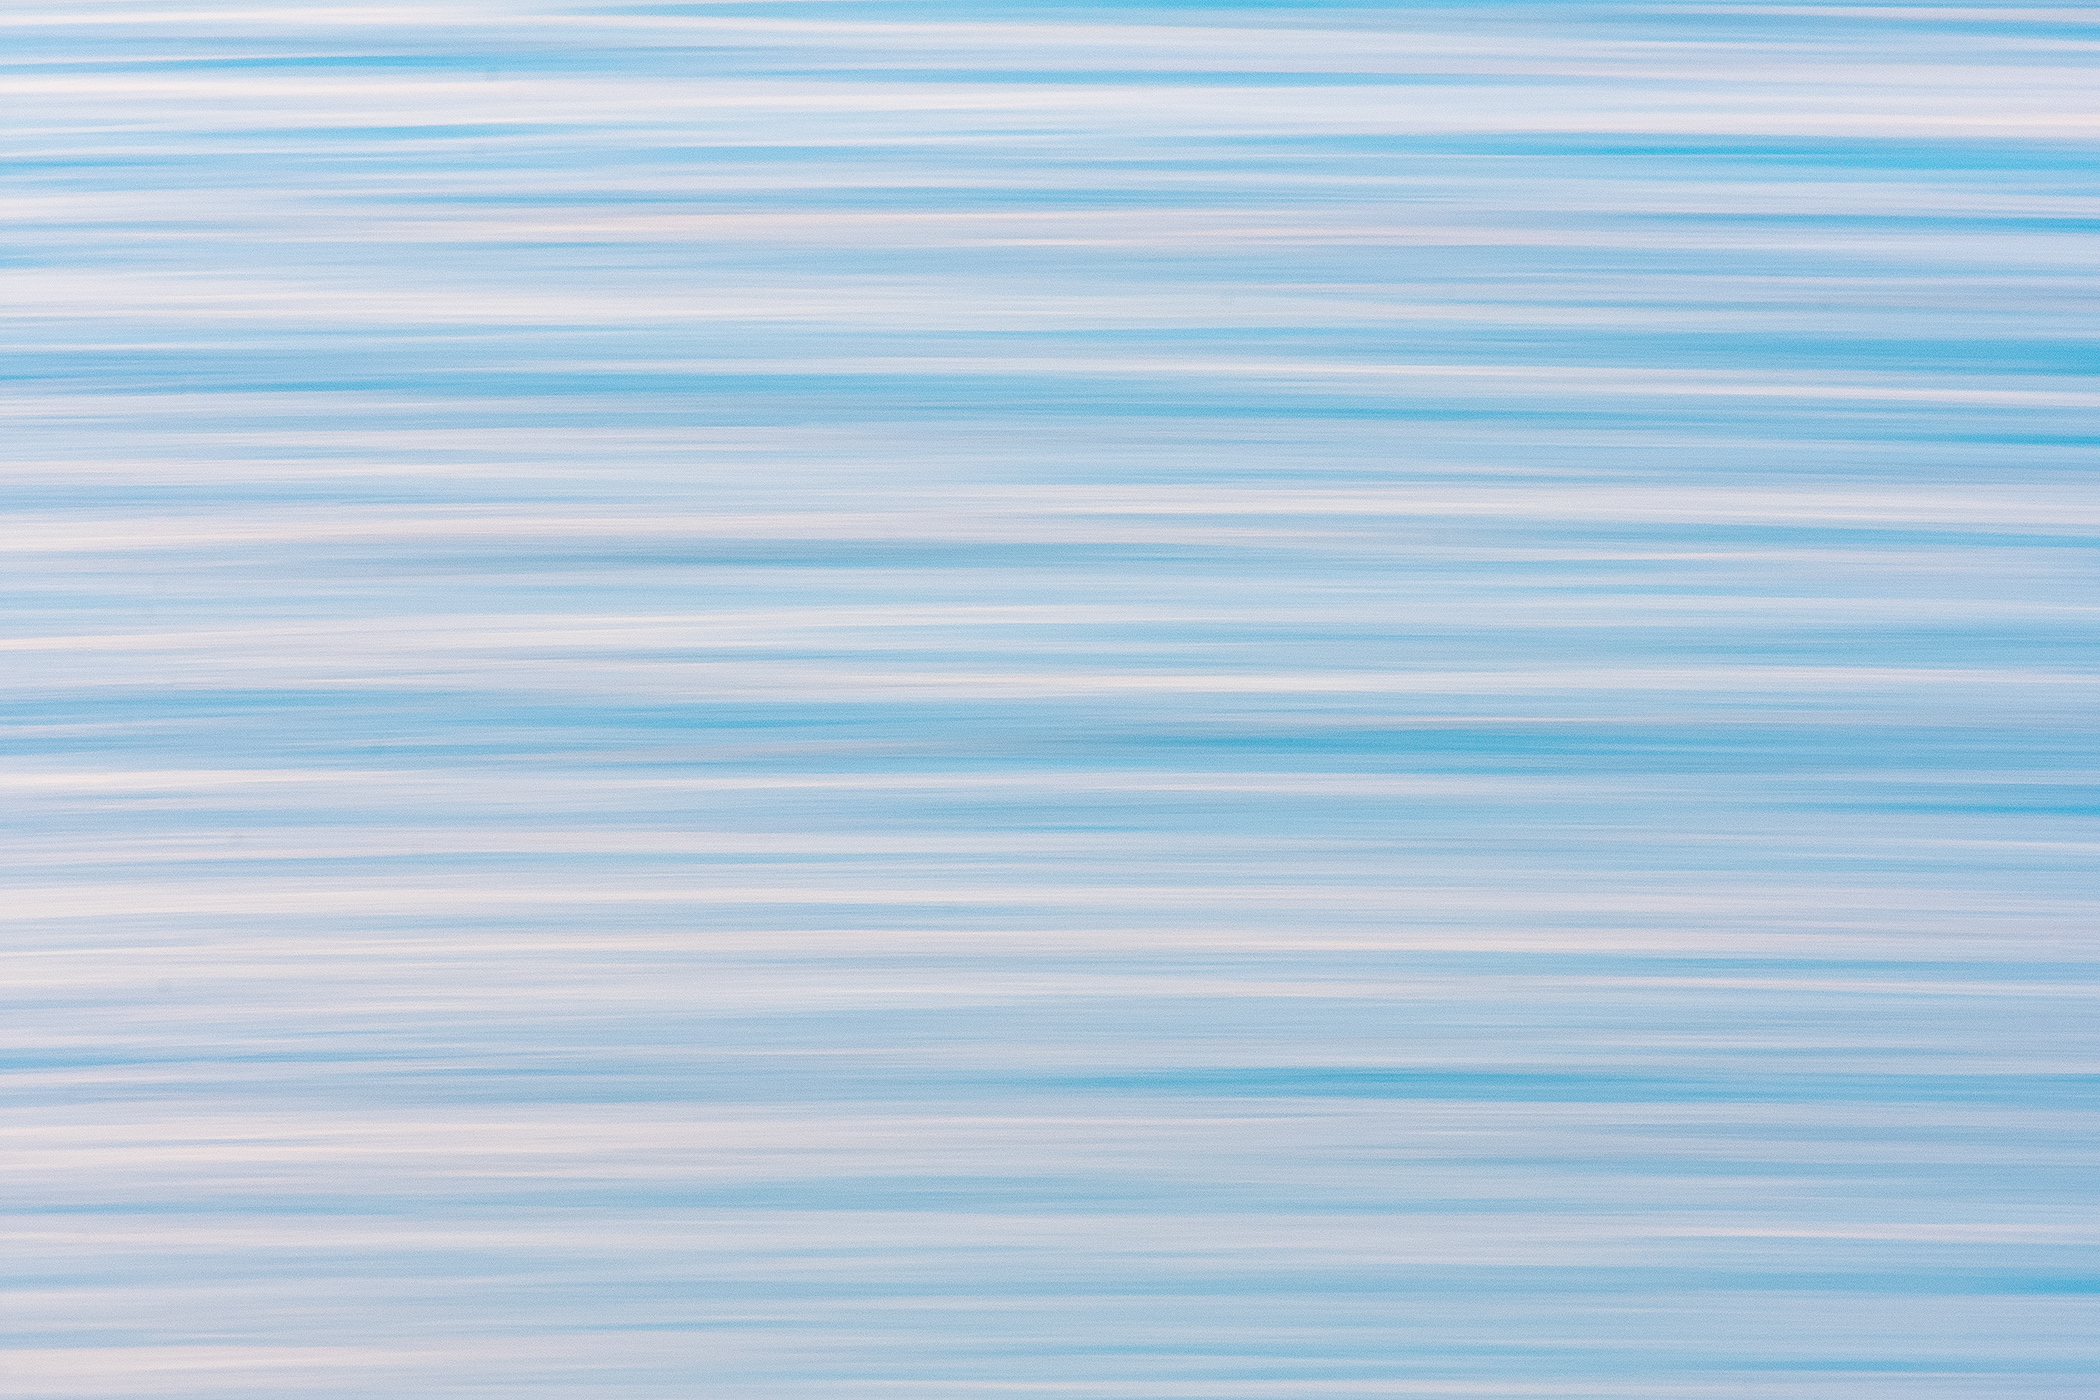 Danube River Abstract